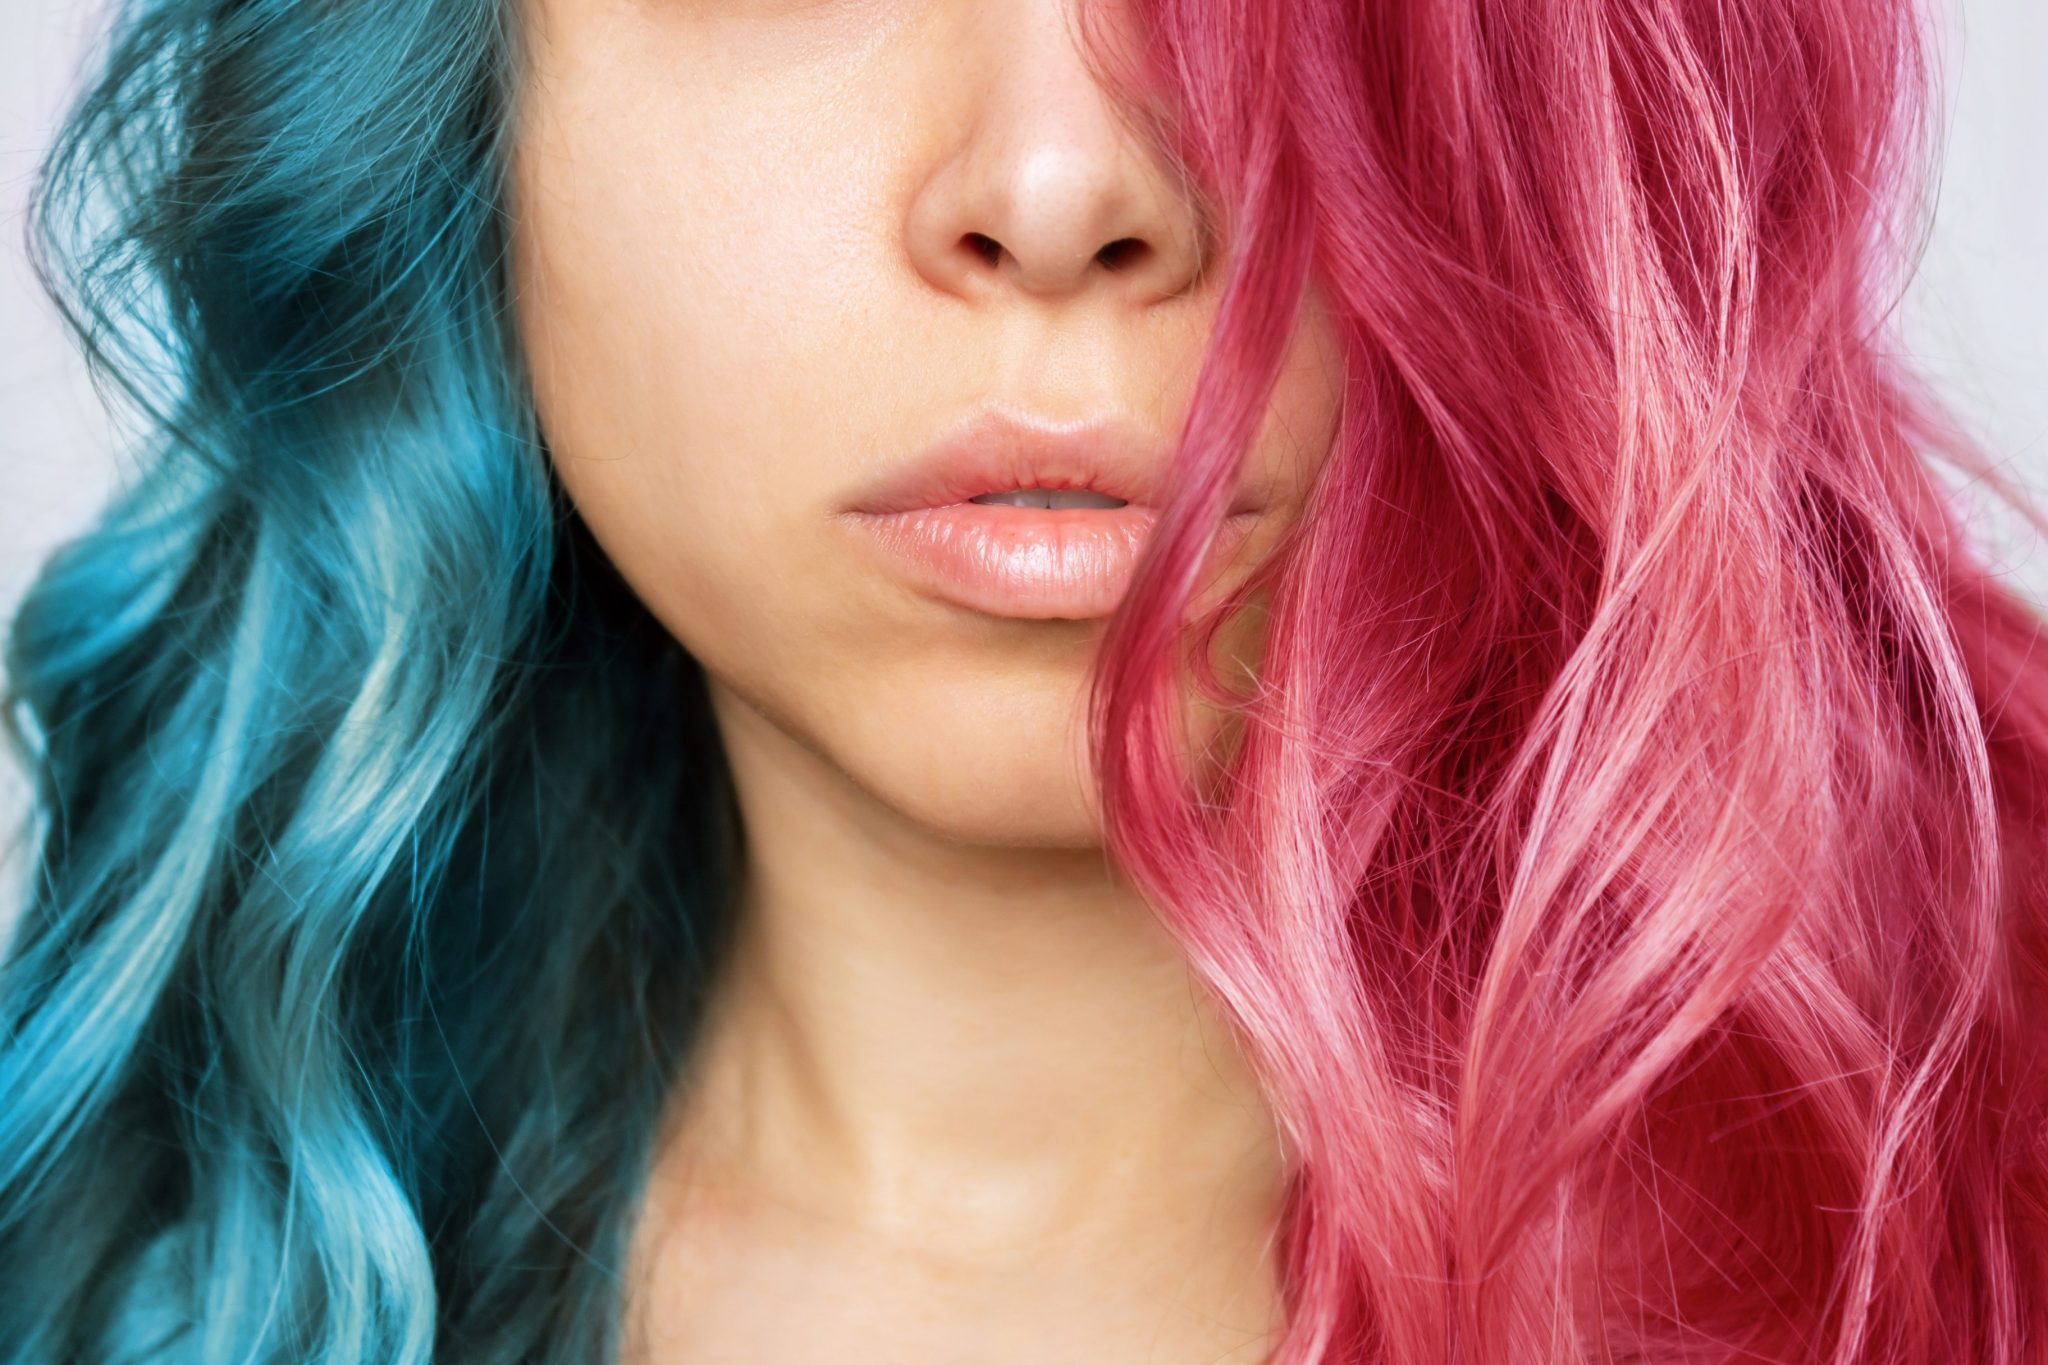 Blue hair: Why it's more than just a trend - wide 11